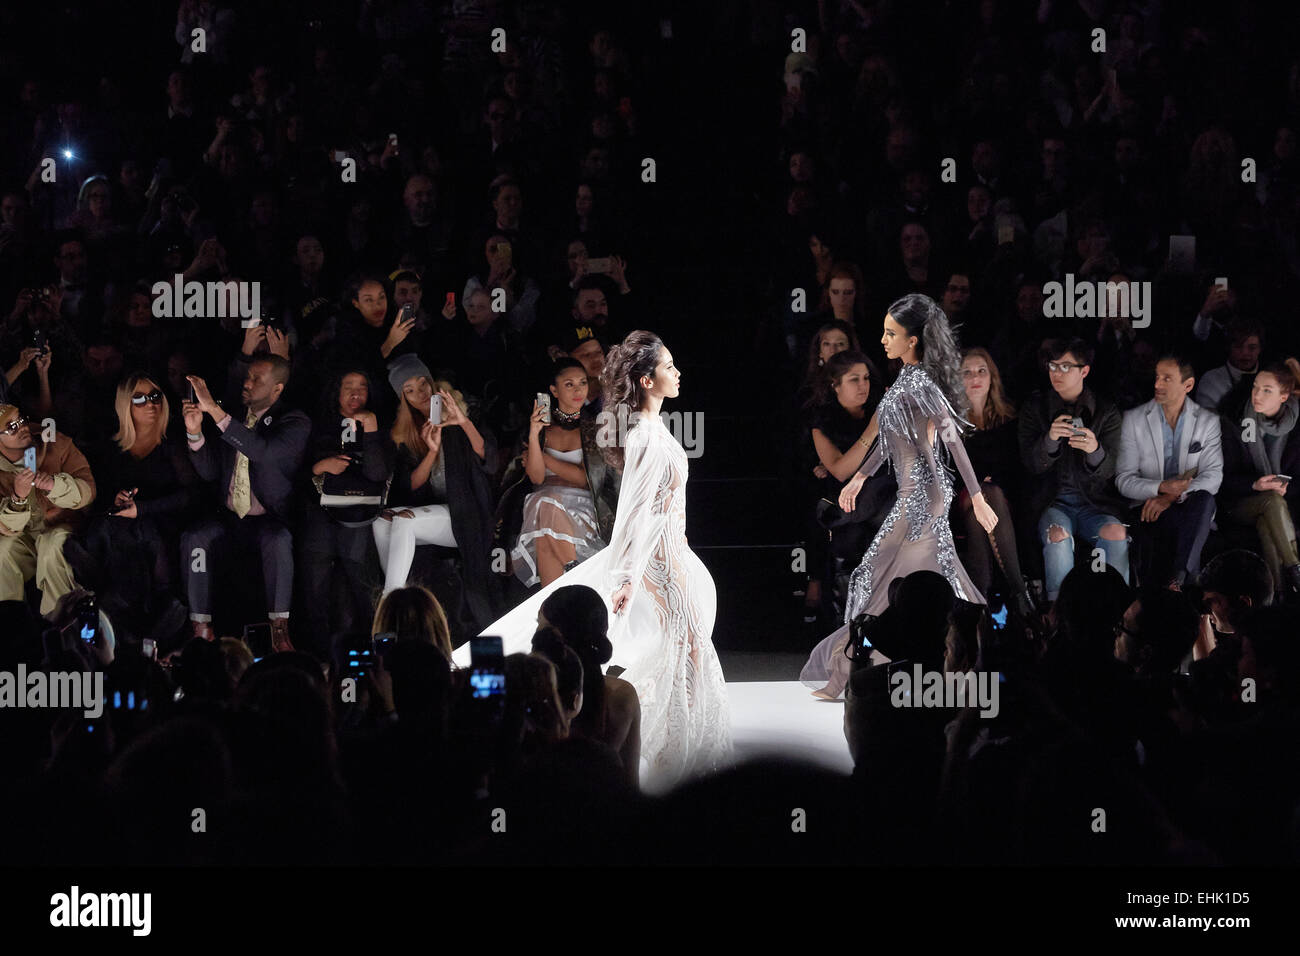 Top model Jasmine Tookes takes to the catwalk wearing a 3 million